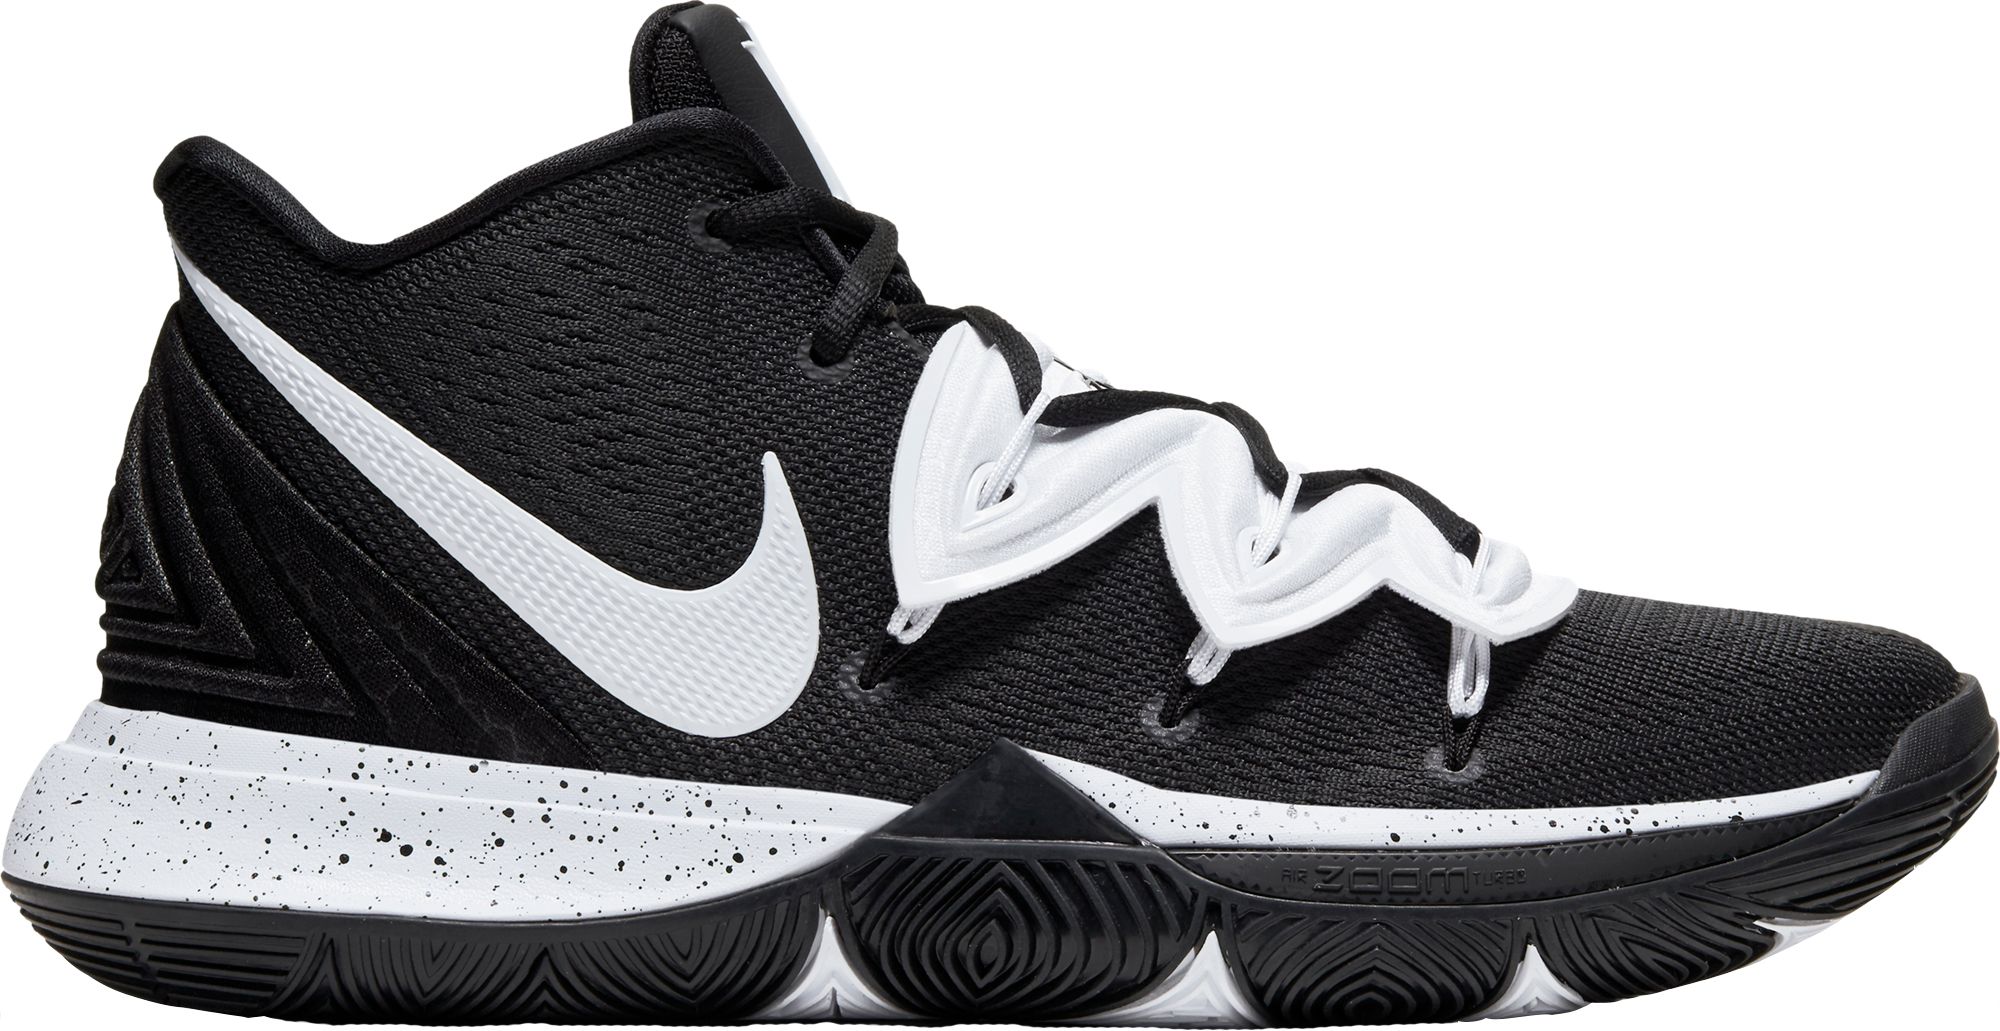 kyrie 5 black and white